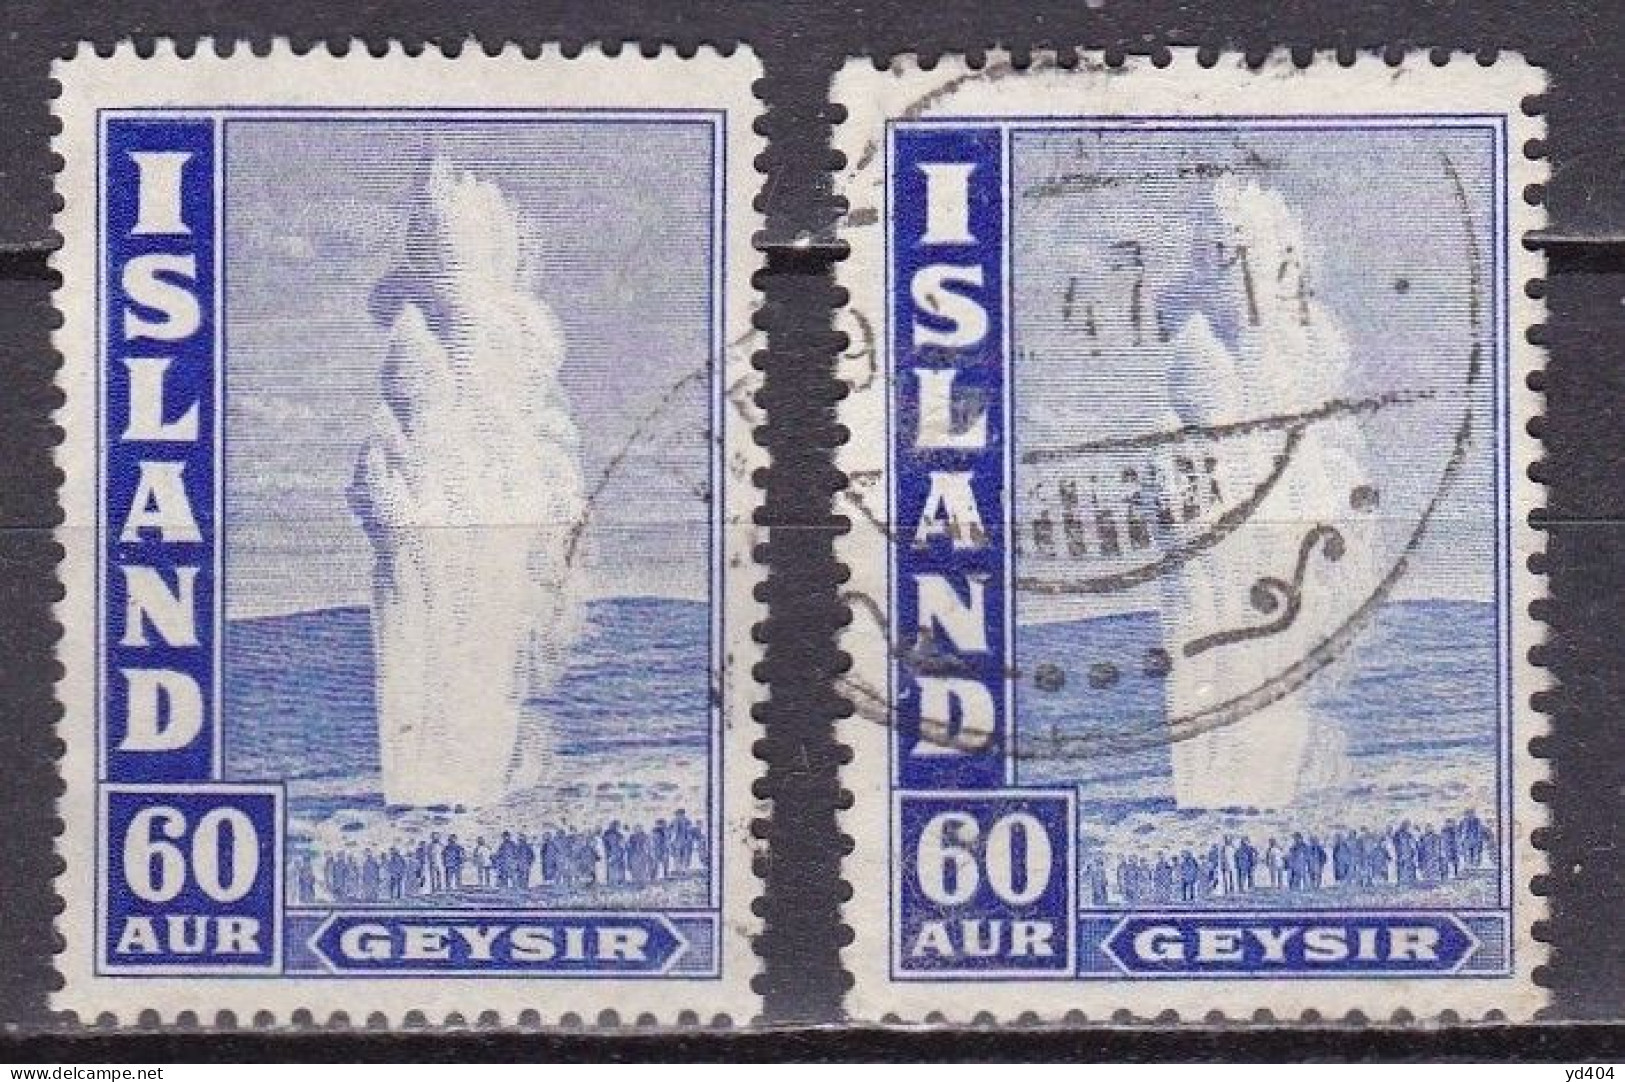 IS036C – ISLANDE – ICELAND – 1943-47 – THE GREAT GEYSER – SC # 208A/Ac USED 12 € - Used Stamps